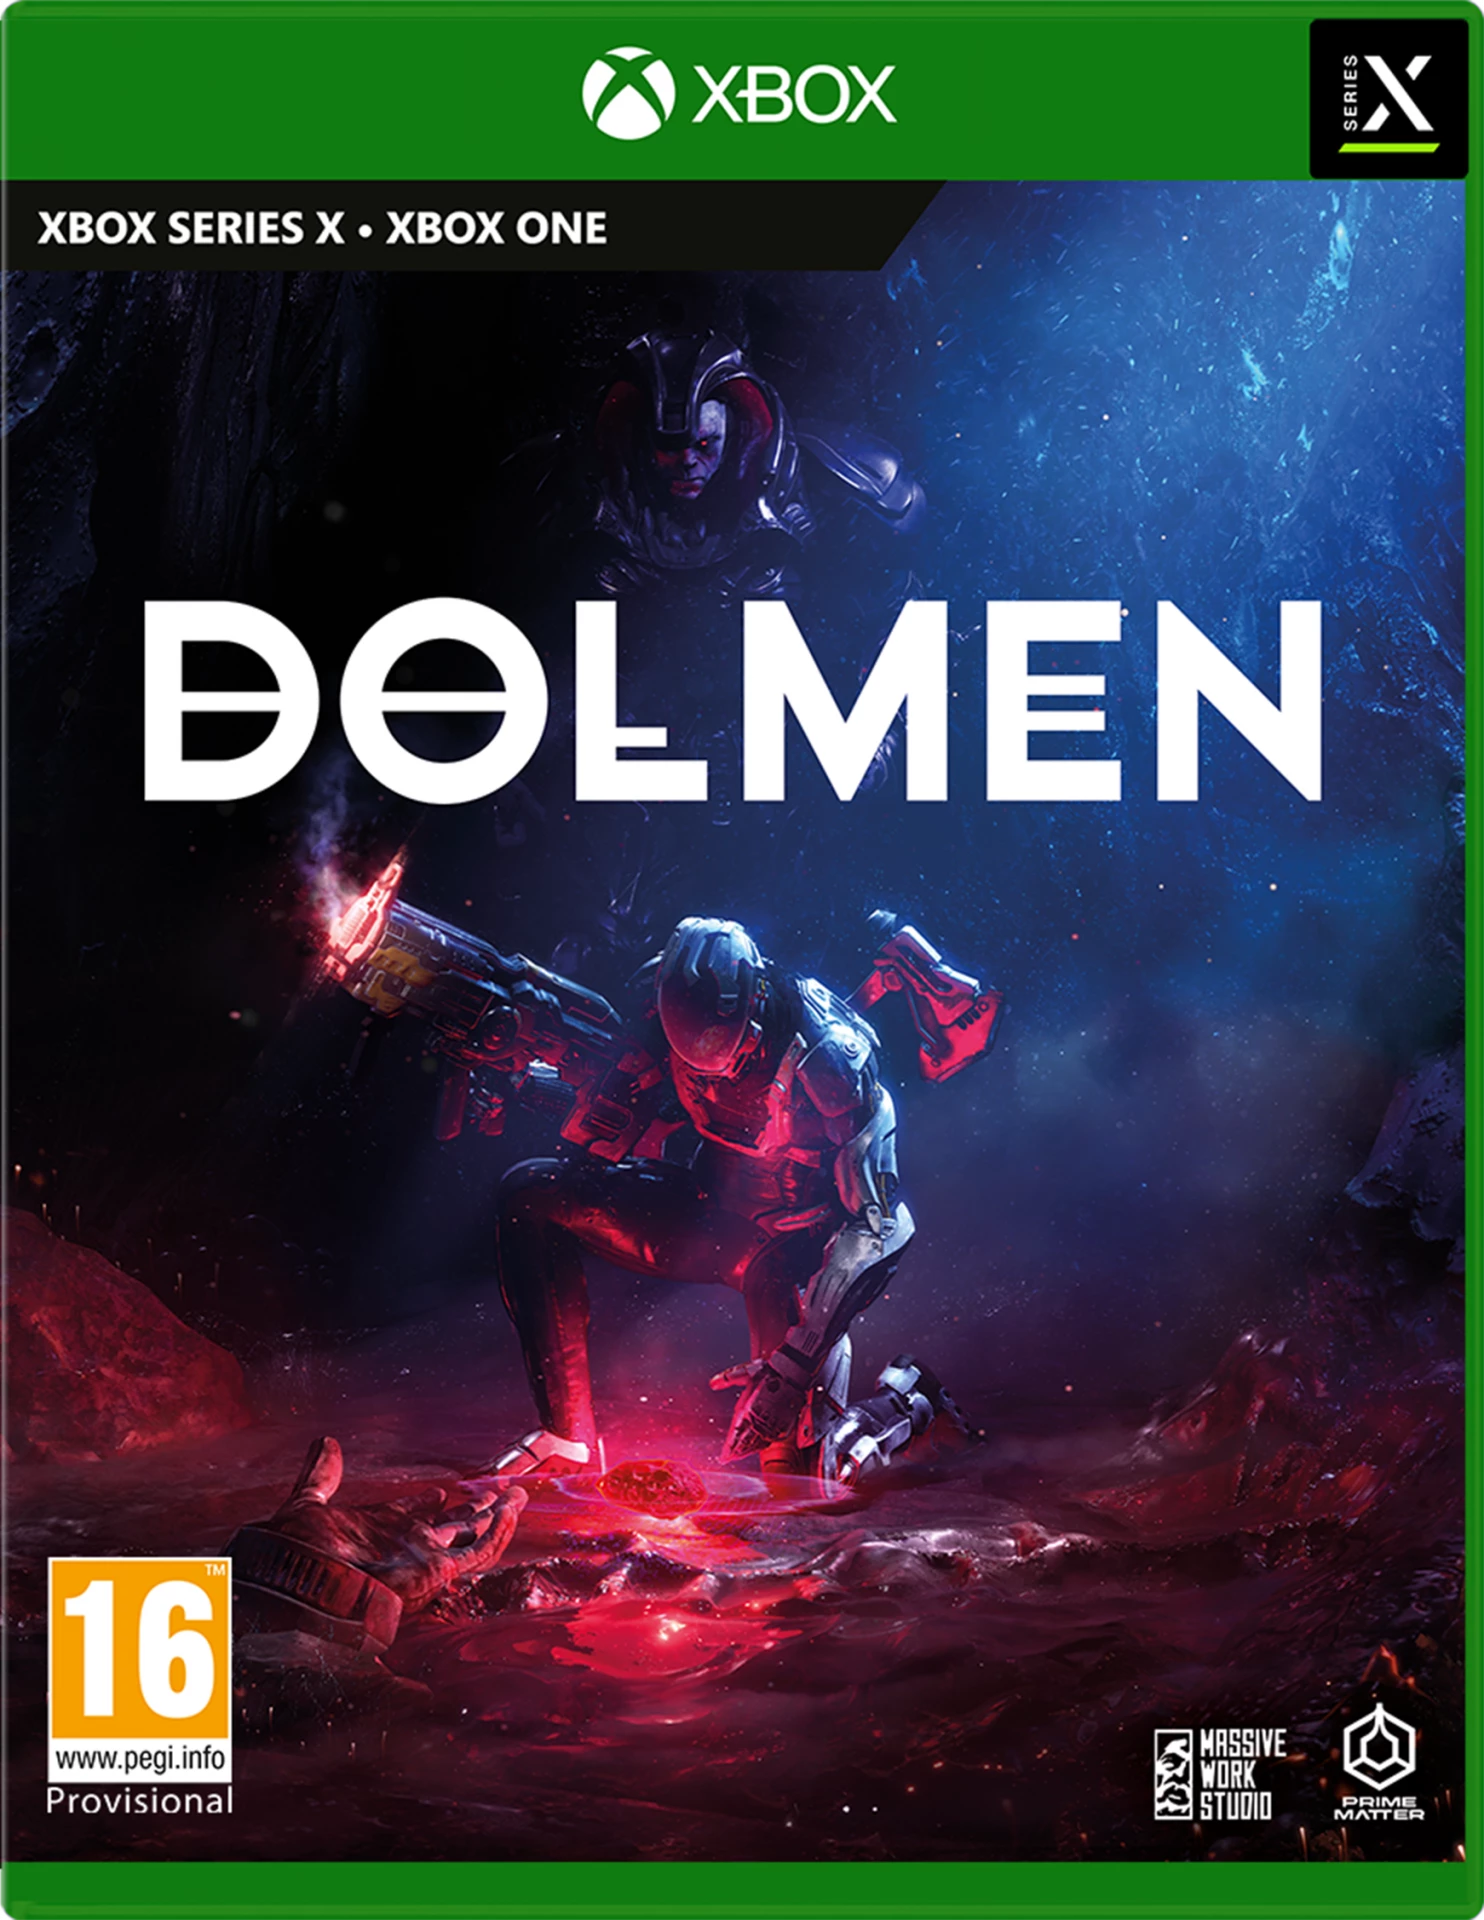 DOLMEN - Day One Edition (Xbox One), Prime Matter